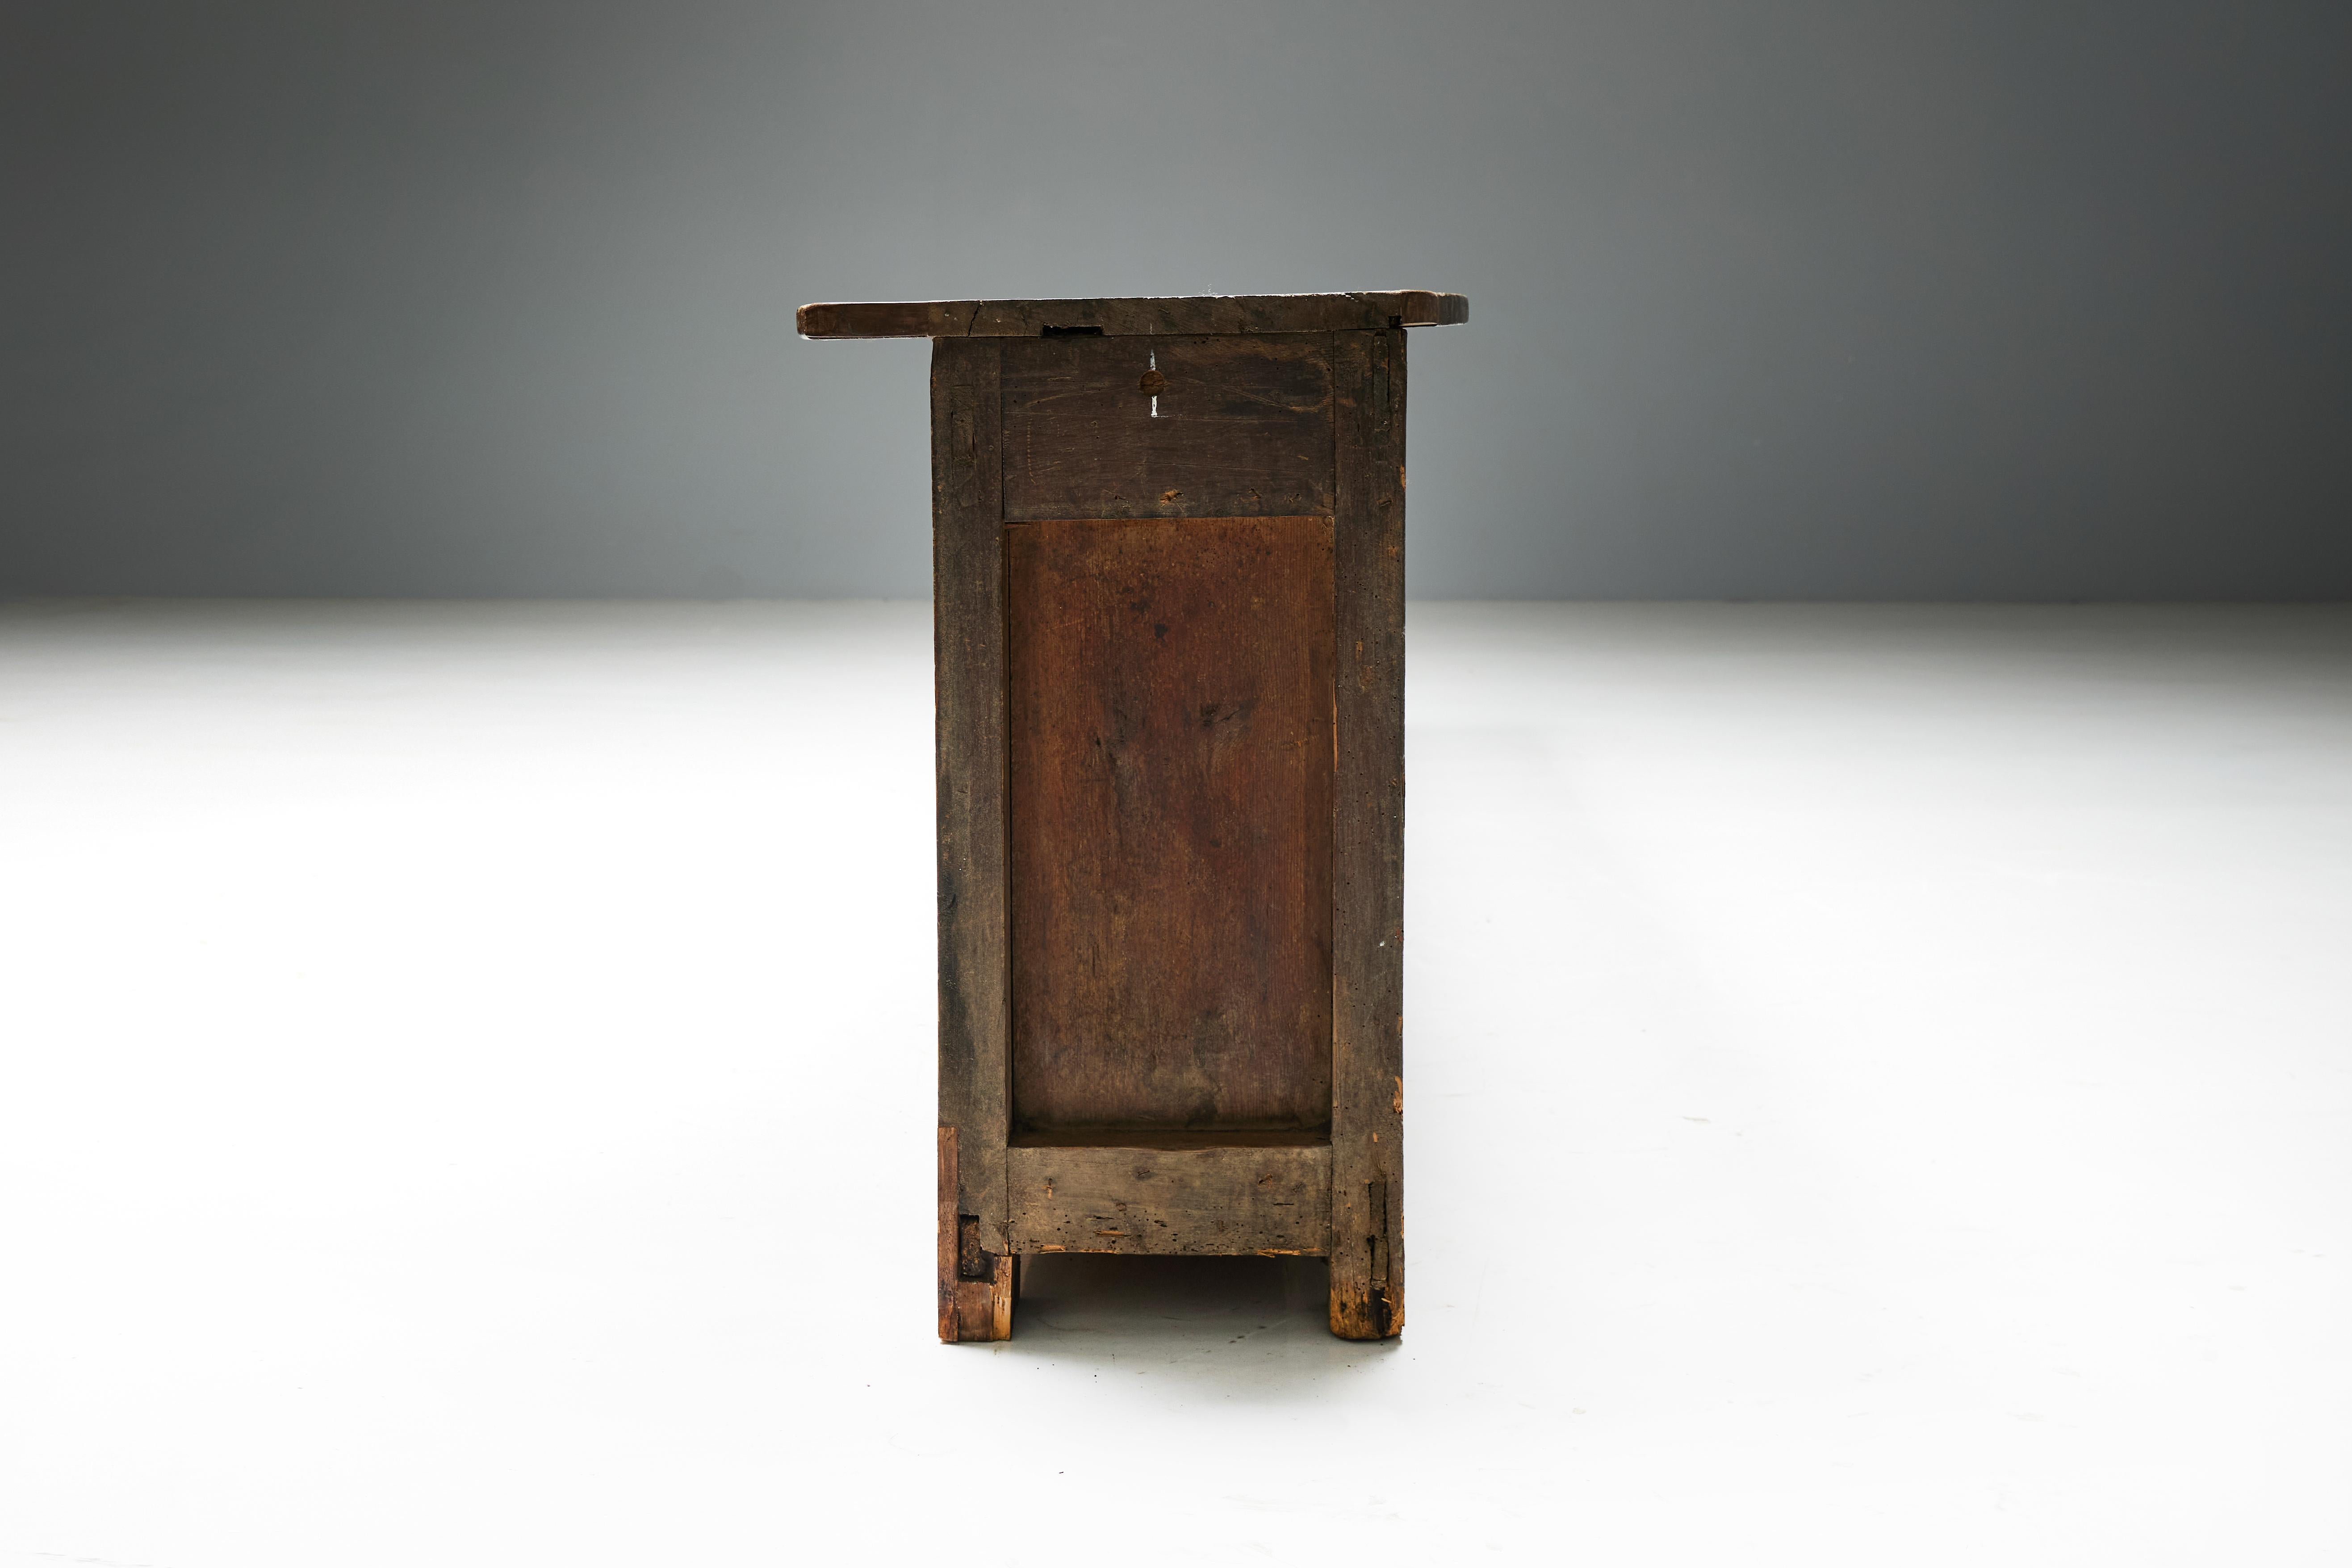 Rustic Art Populaire Freestanding Bar Counter, France, 19th Century For Sale 1